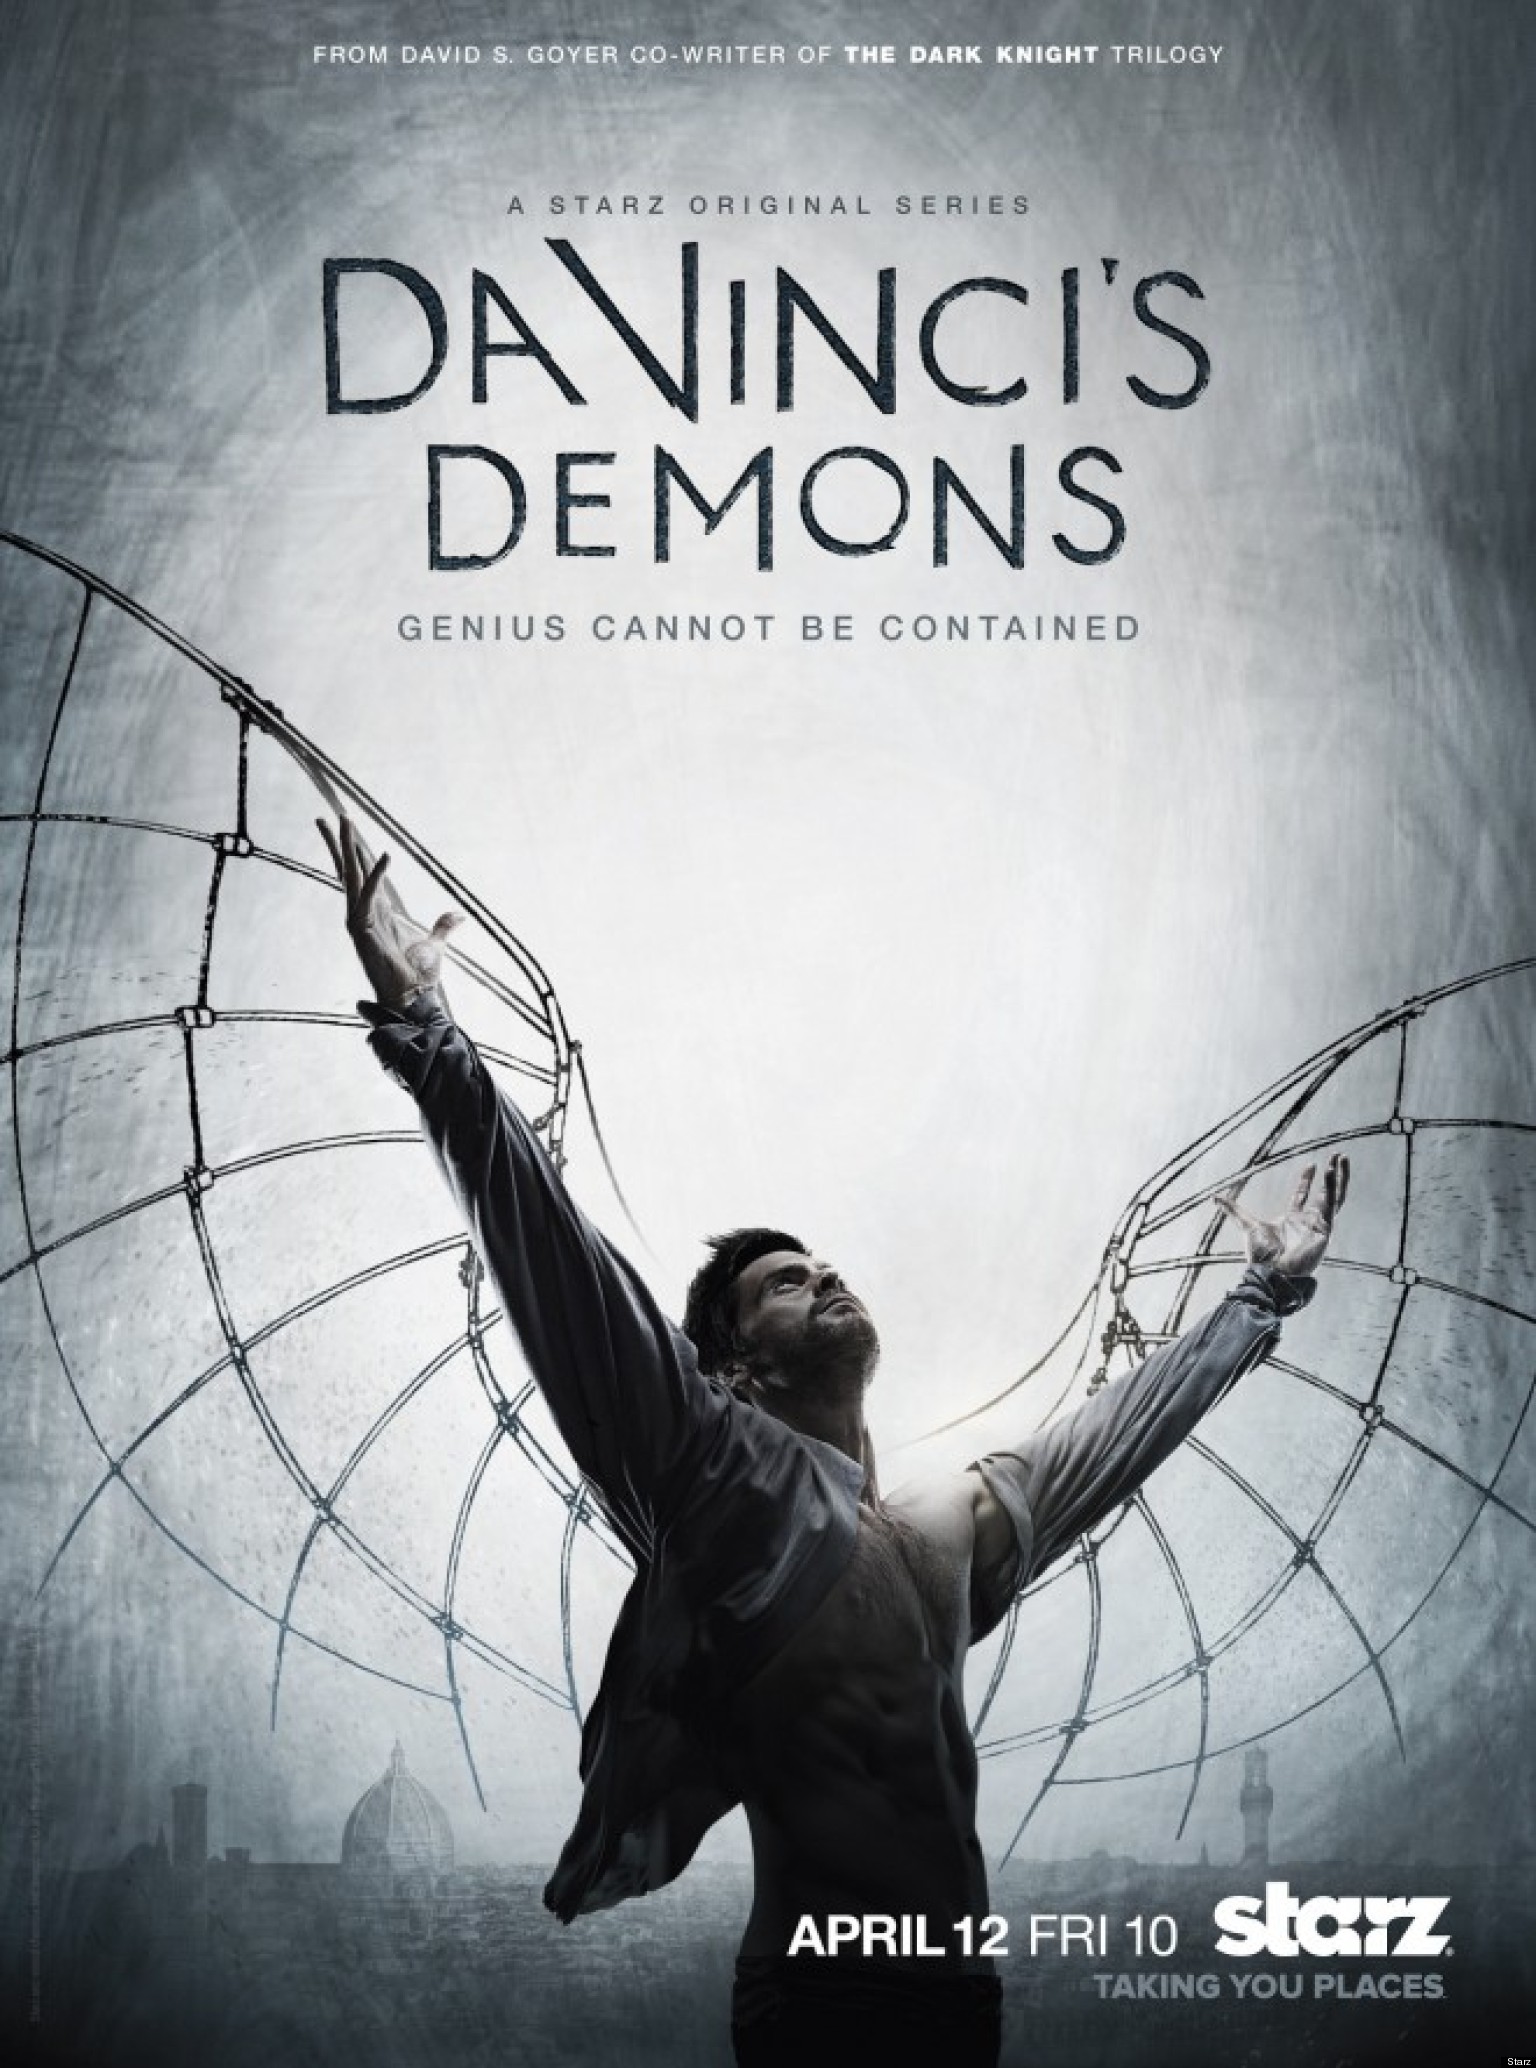 'Da Vinci's Demons' Television Series Gets Us Amped With Epic Poster